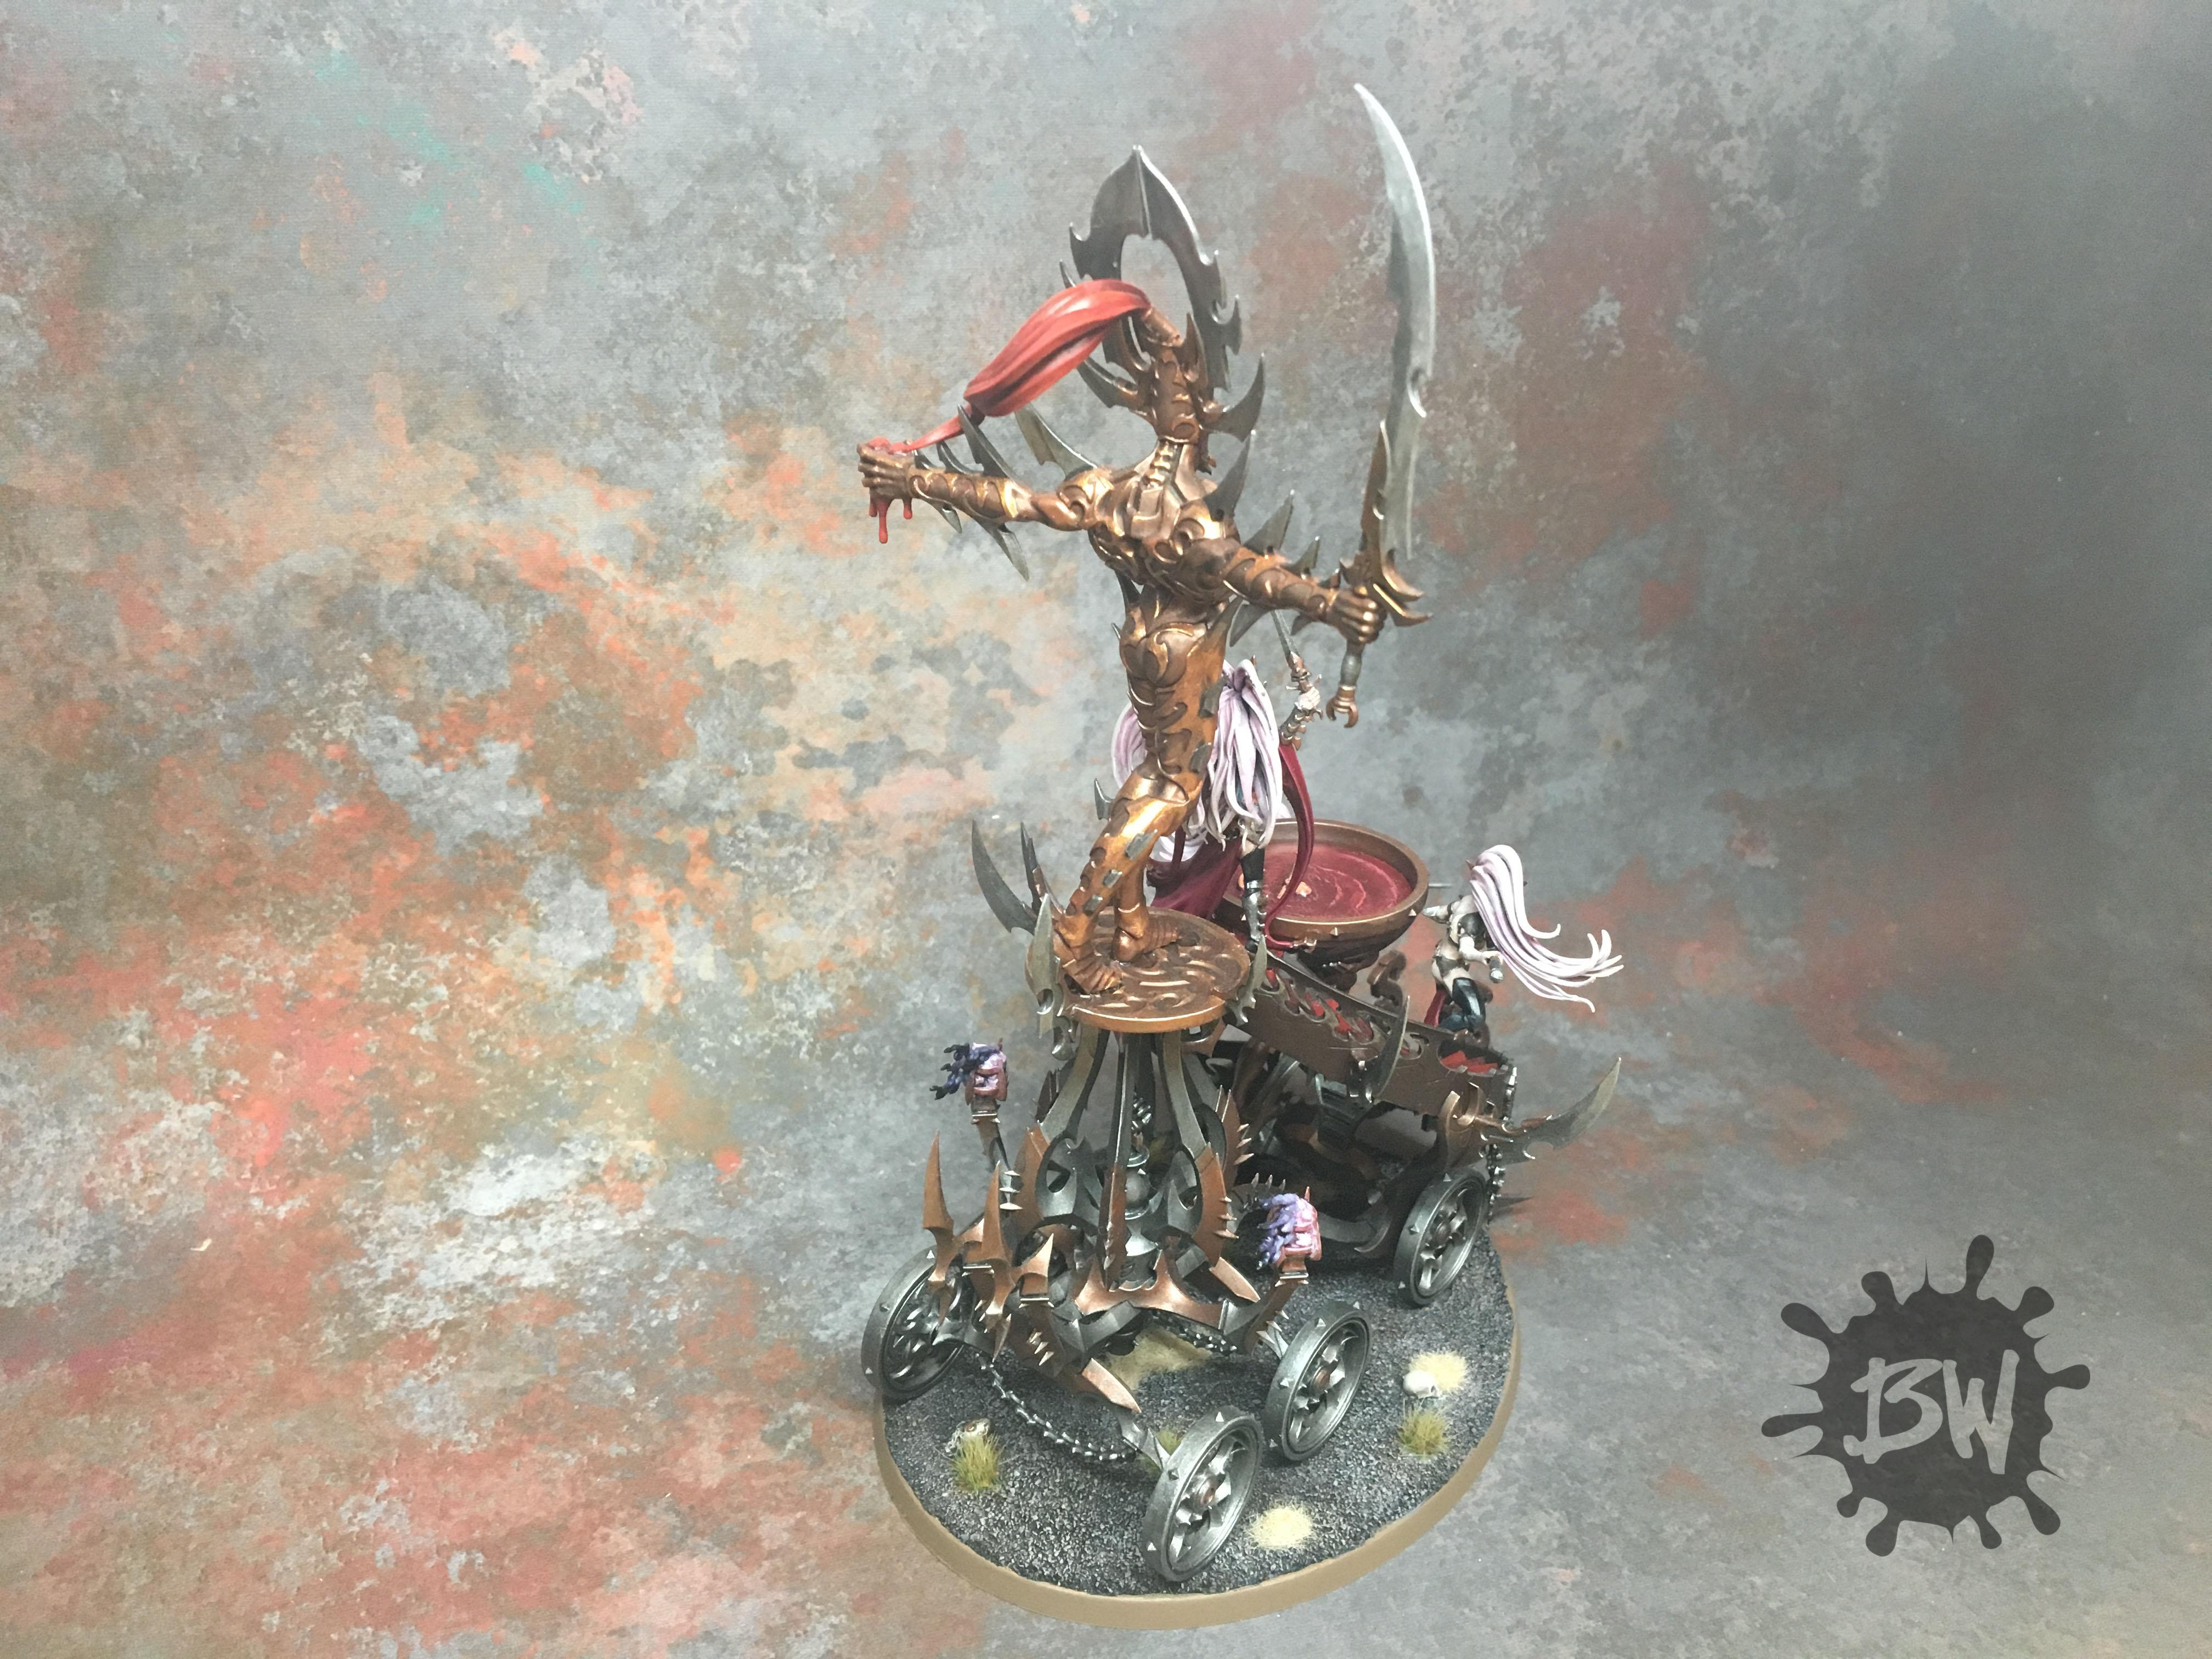 Age Of Sigmar, Bw, Daughters Of Khaine, Games Workshop, Order, Painting, Slaughter Queen On Cauldron Of Blood, Warhammer Fantasy